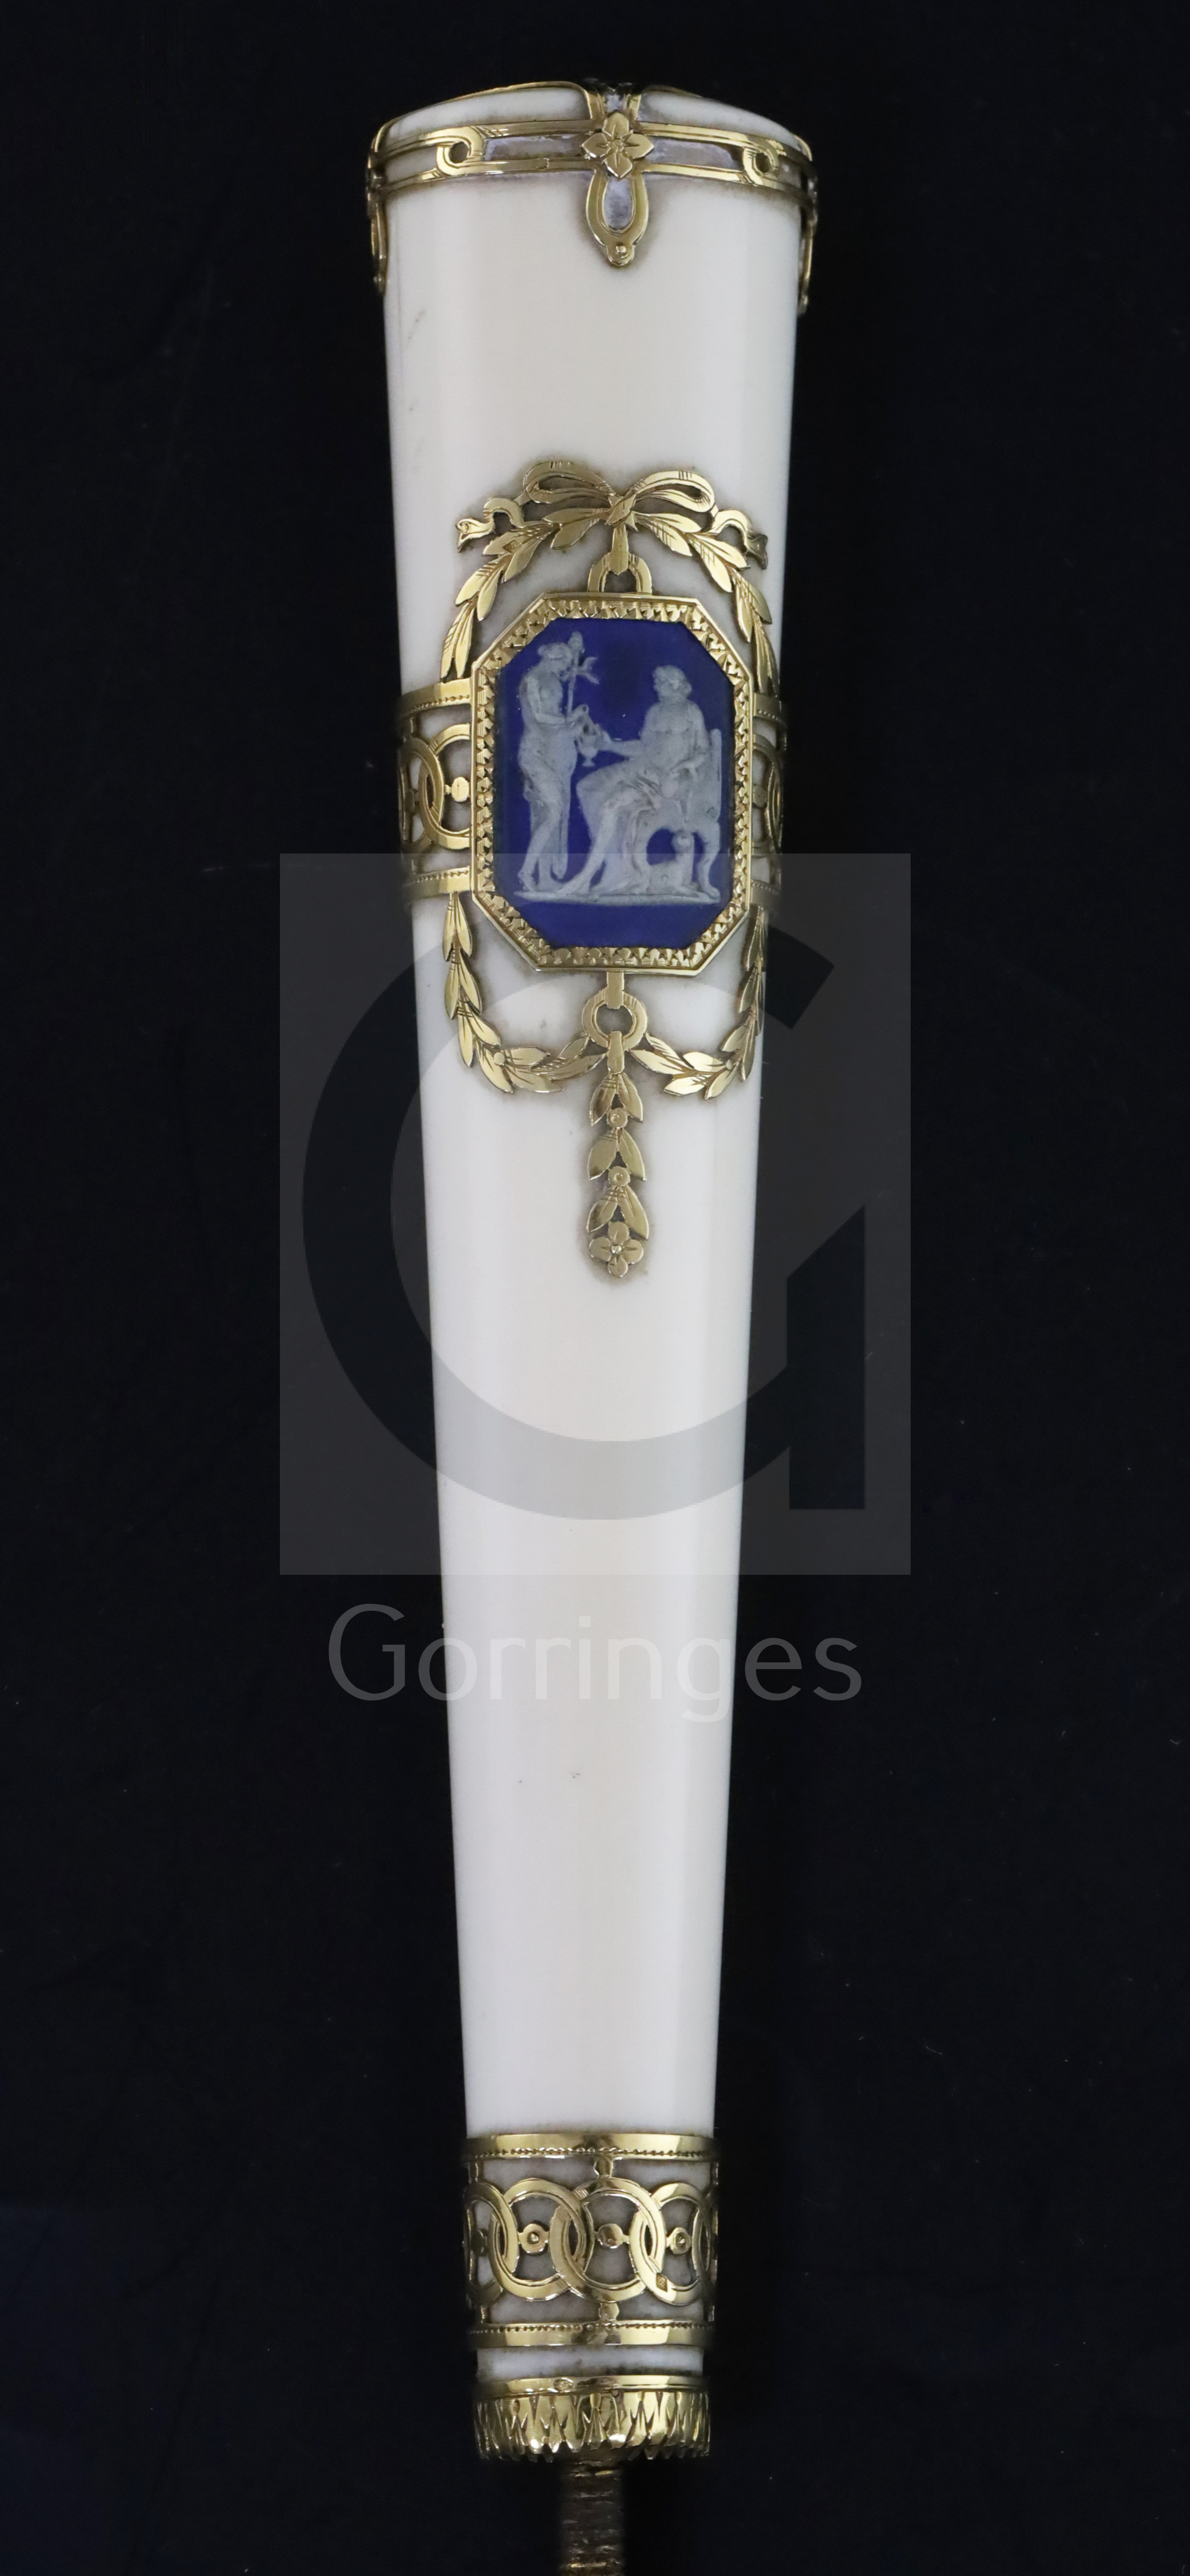 A Swiss gold-mounted ivory parasol handle, inset with a blue jasper plaque of classical figures